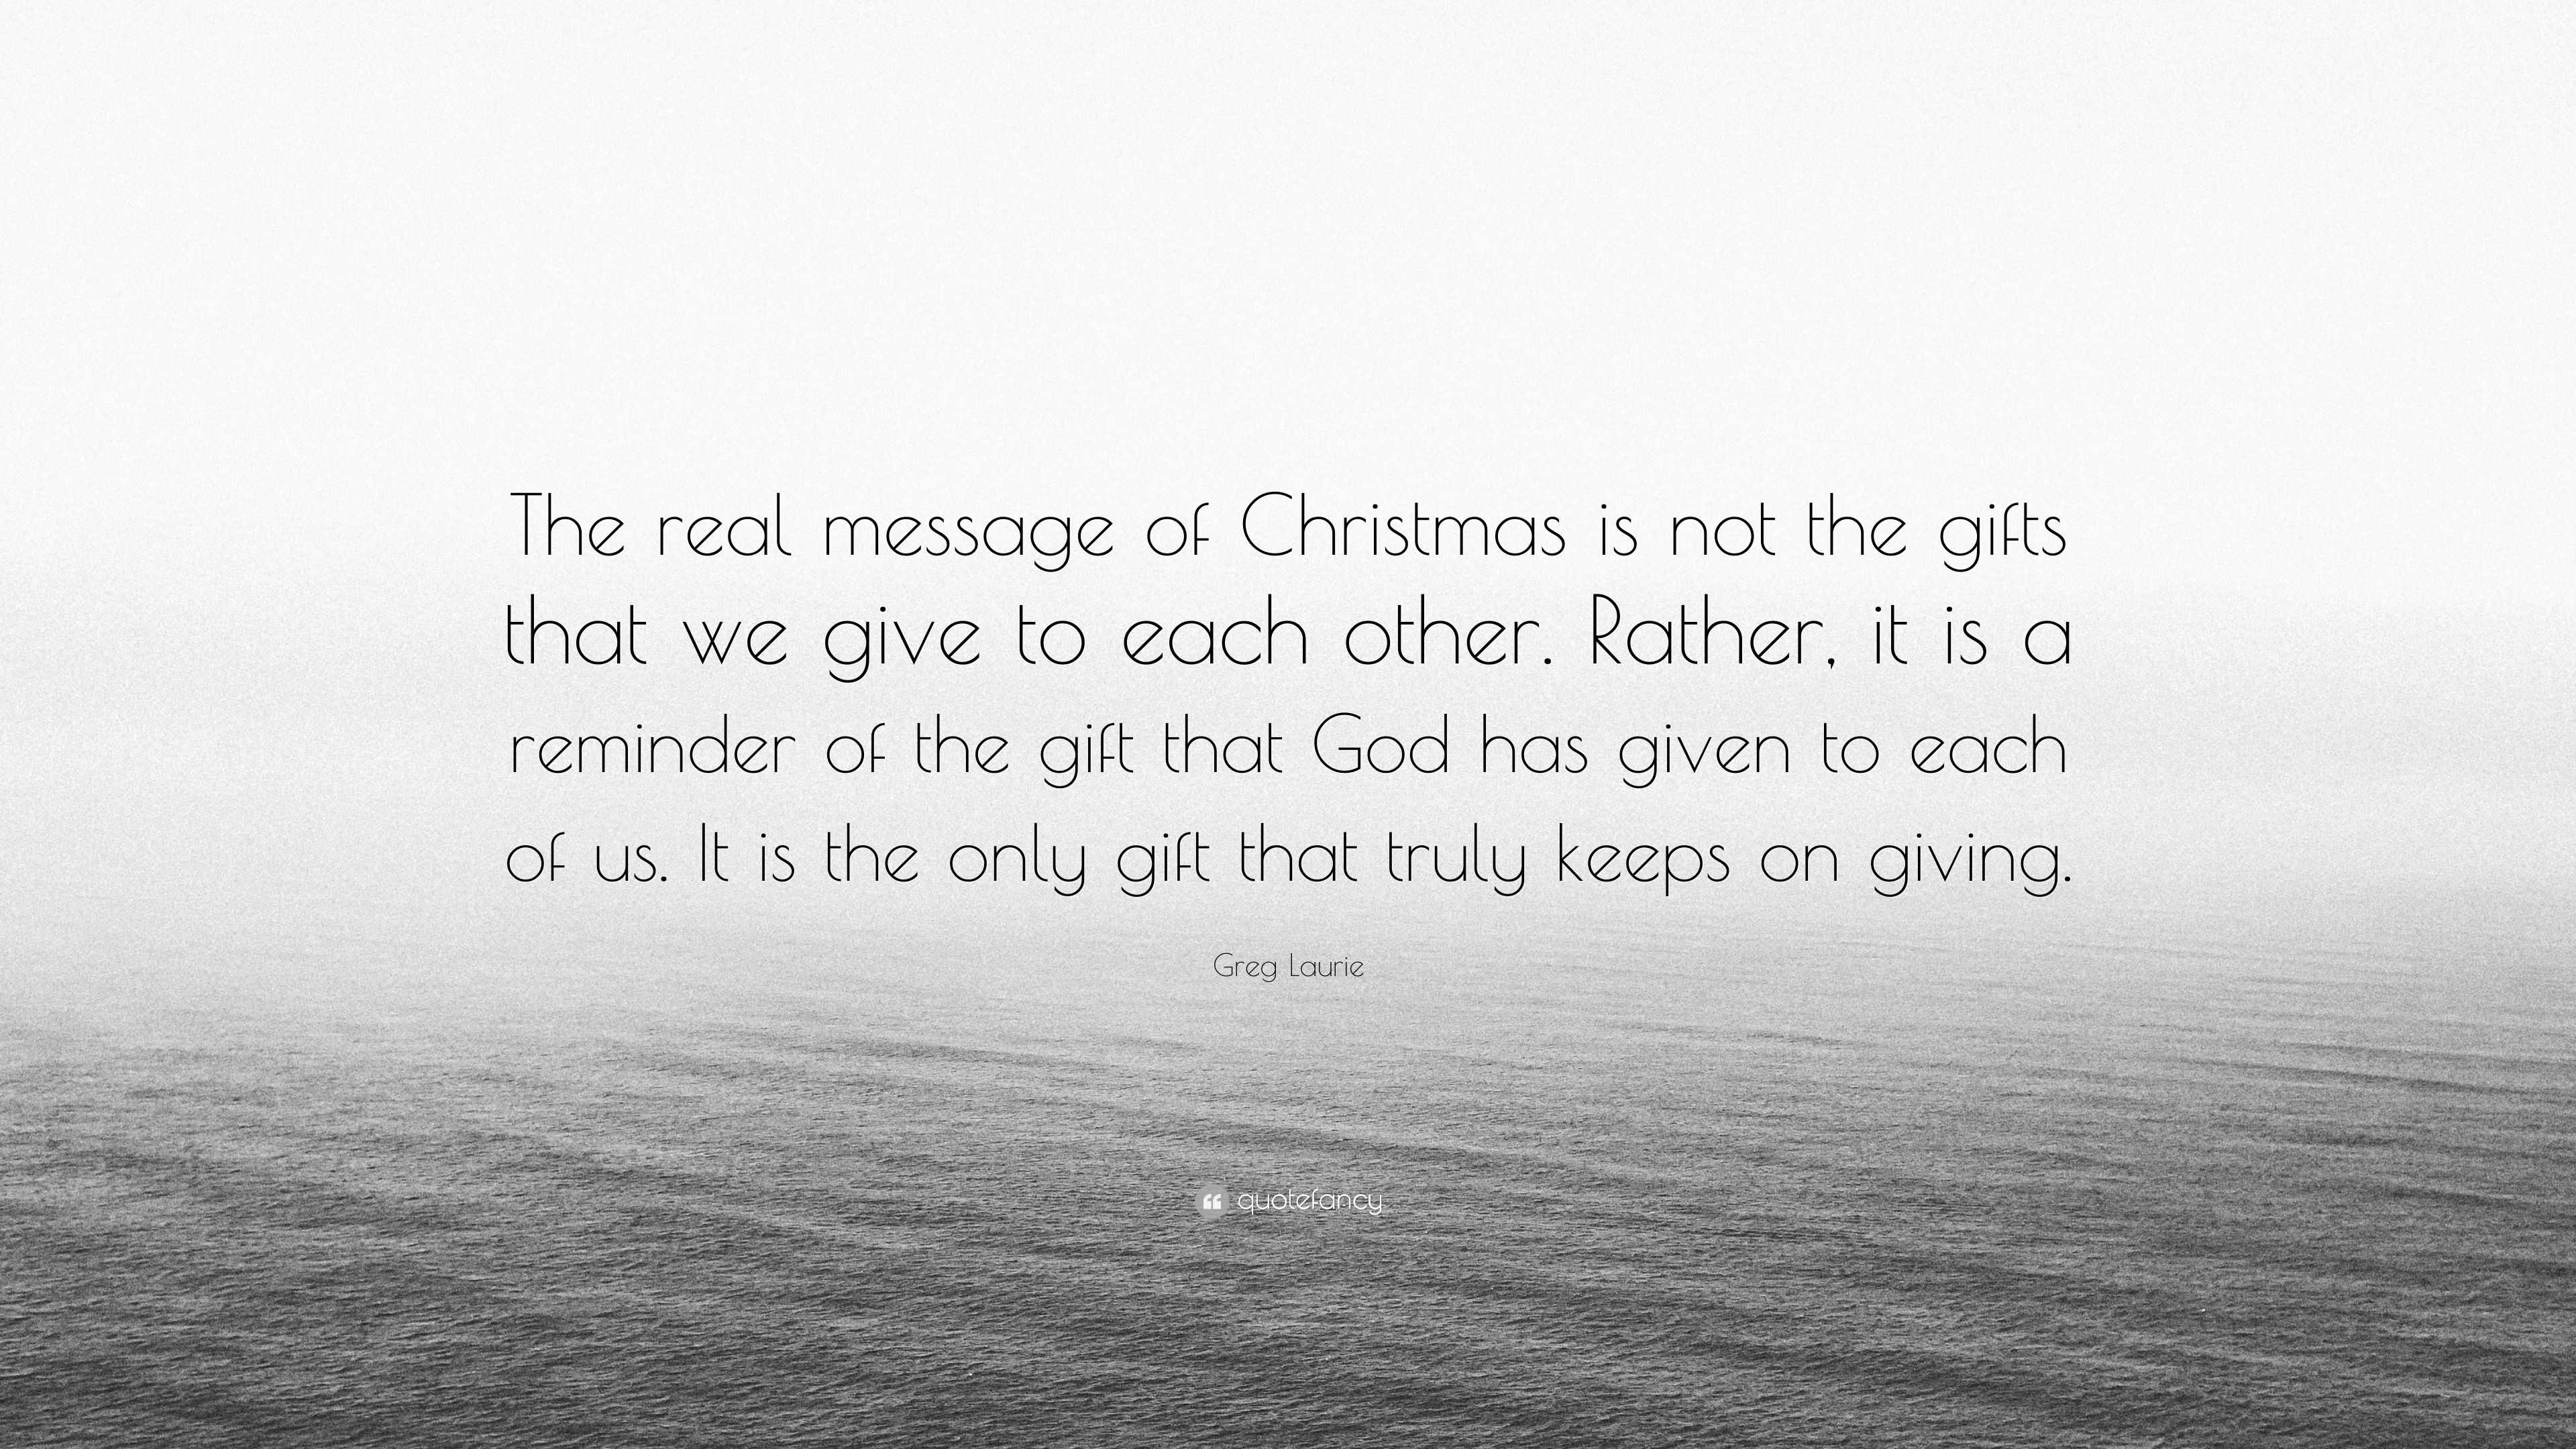 giving gifts quotes